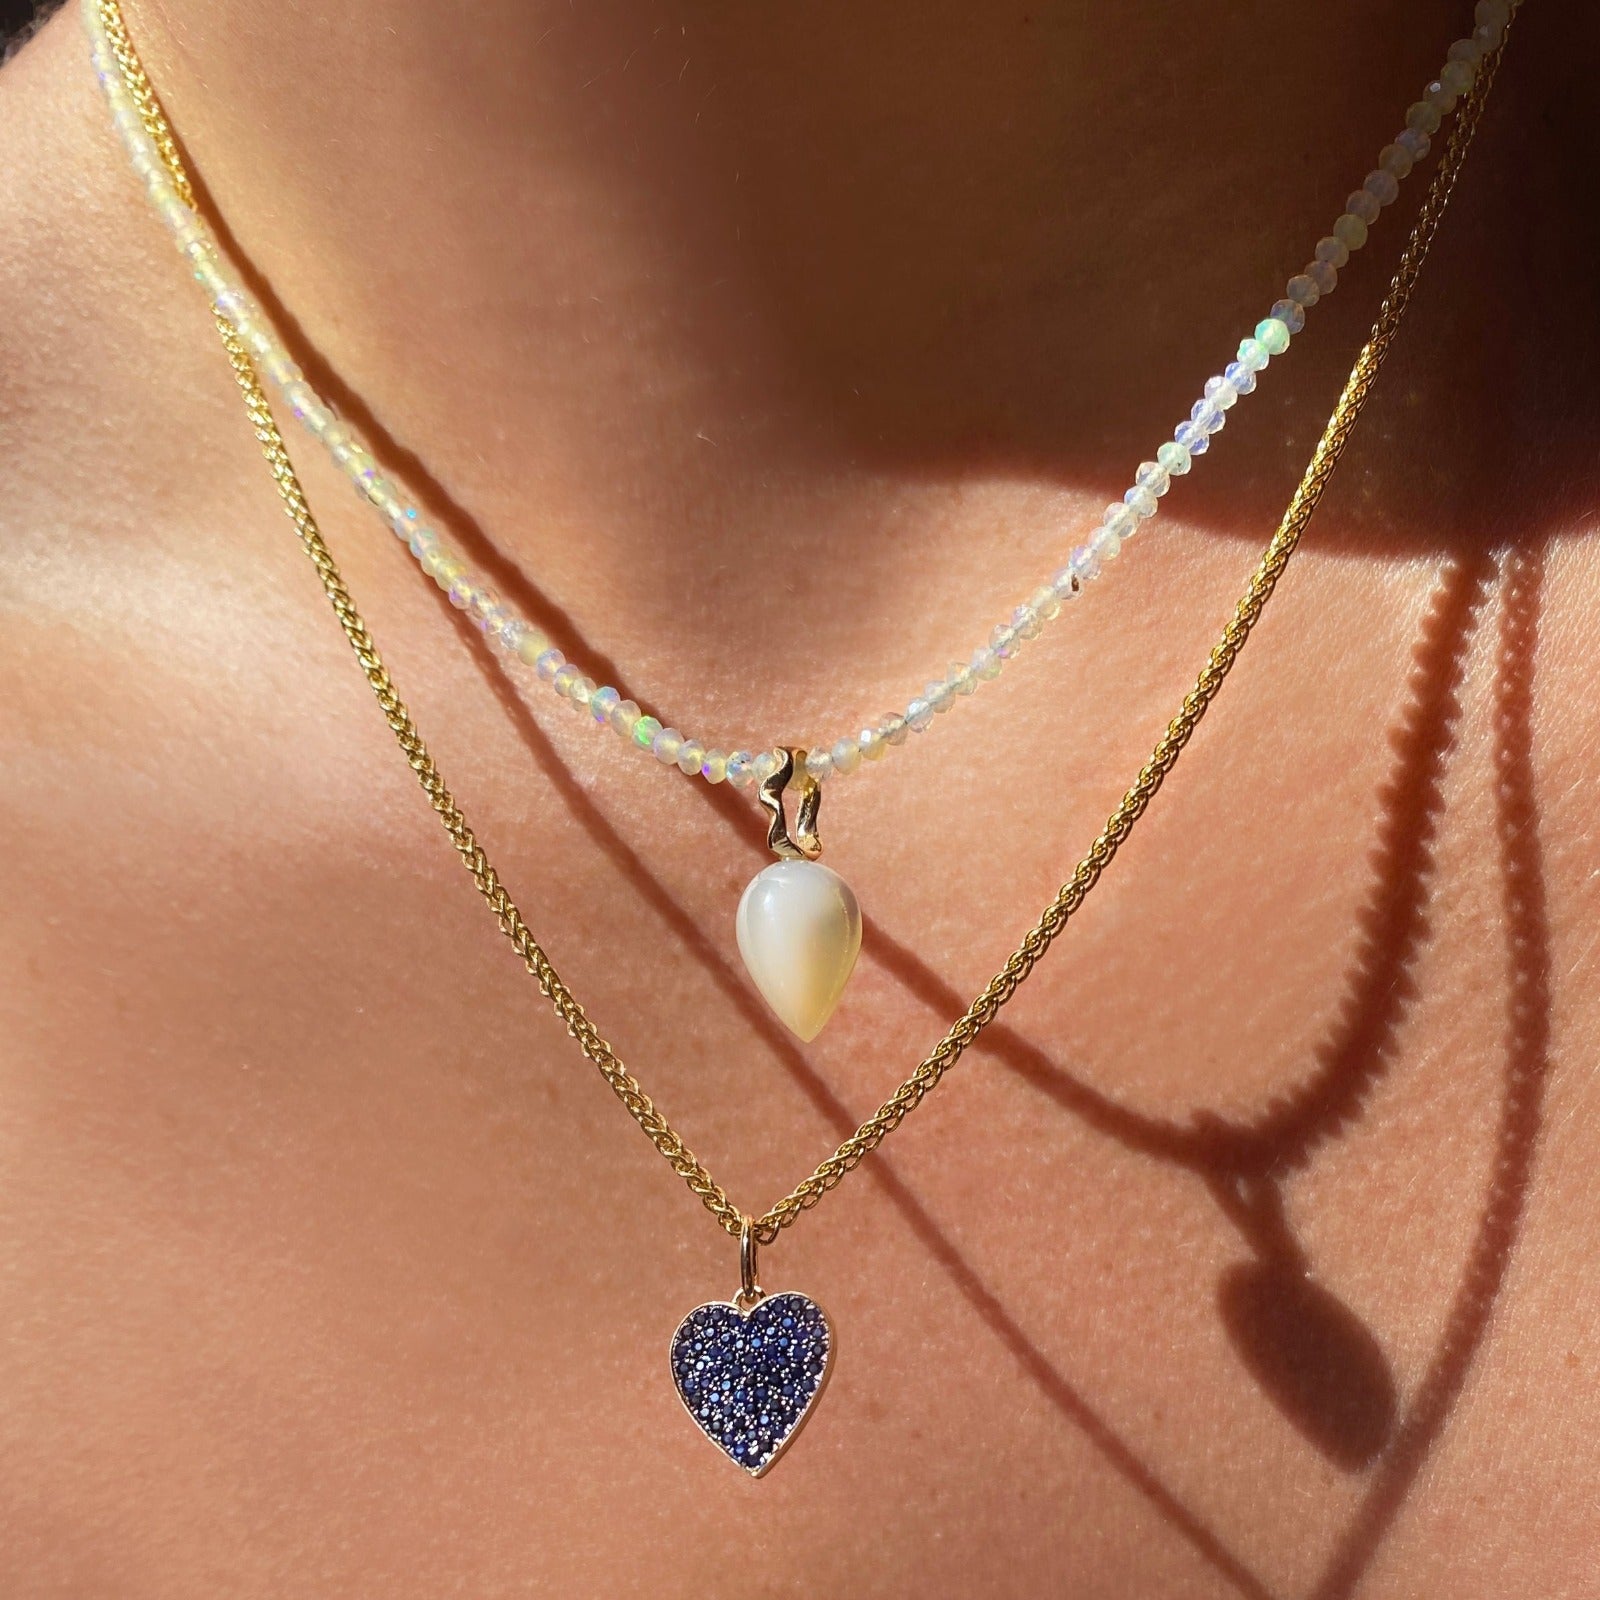 14k gold Wheat Chain Necklace. Styled on a neck with a pave medium heart charm